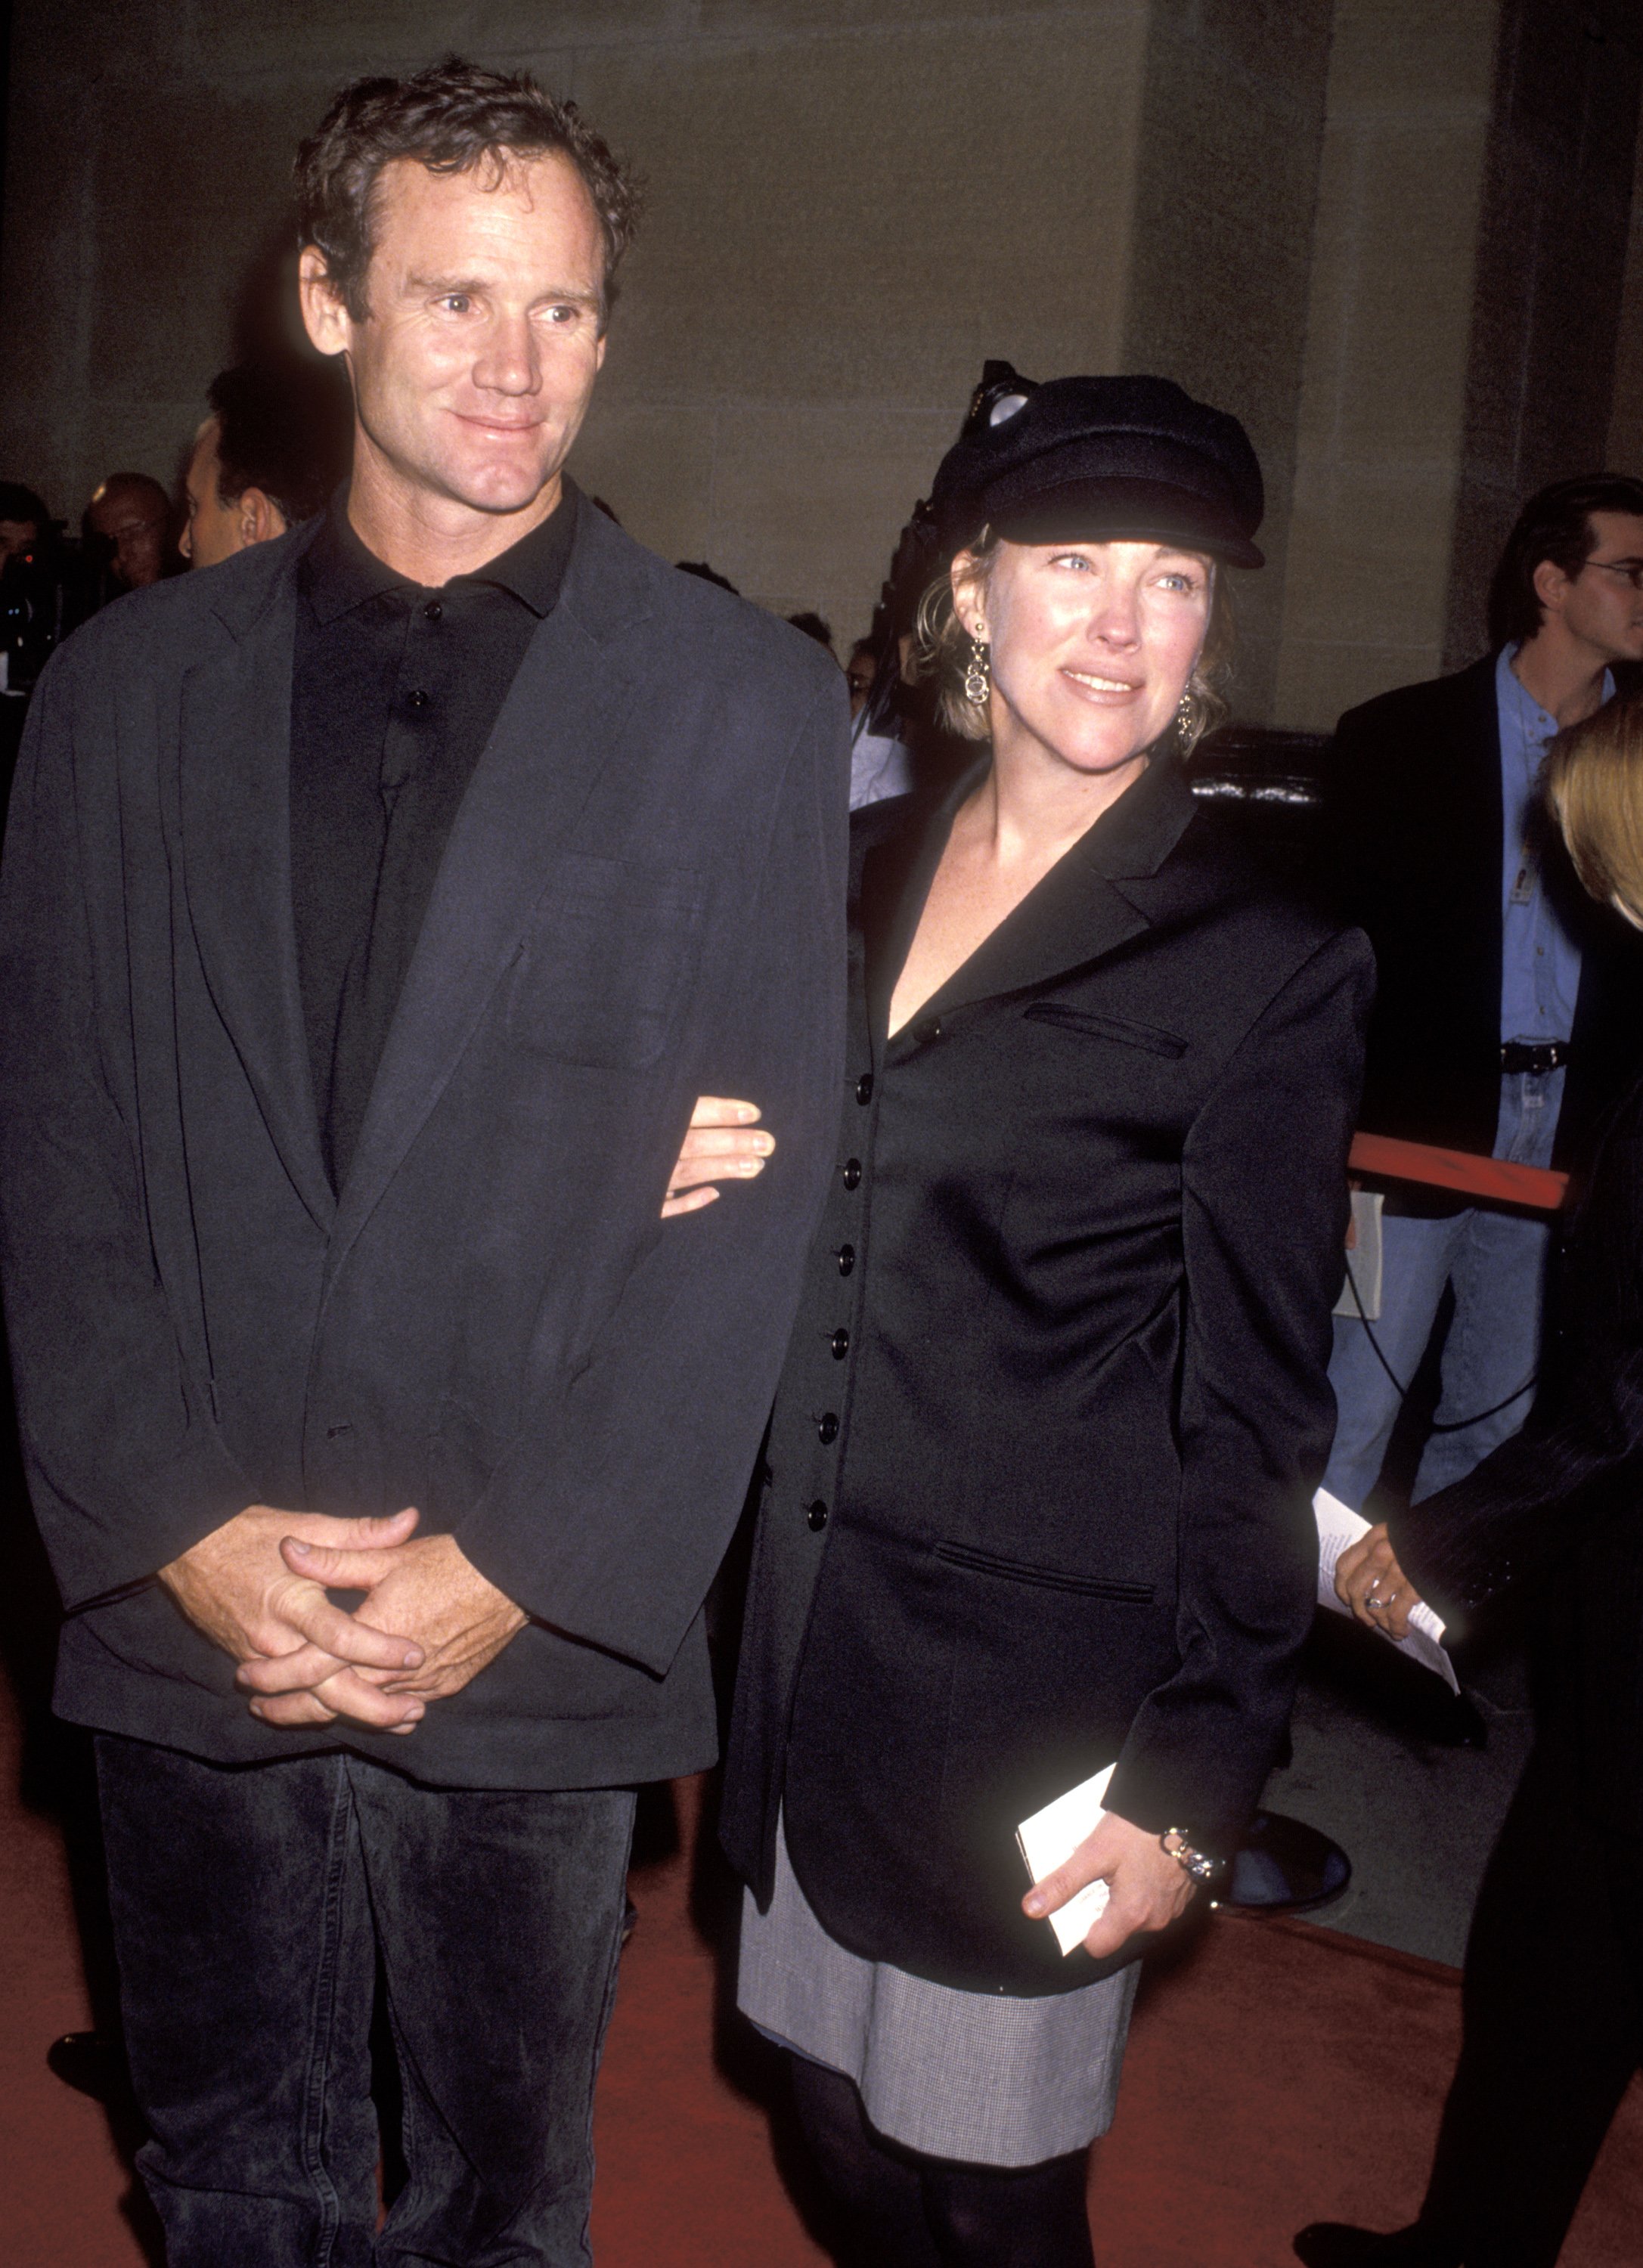 Actress Catherine O'Hara and husband Bo Welch attend the "Night and the City" Gala Tribute to Irwin Winkler on October 15, 1992 at Los Angeles County Museum of Art in Los Angeles, California. | Source: Ron Galella/Getty Images